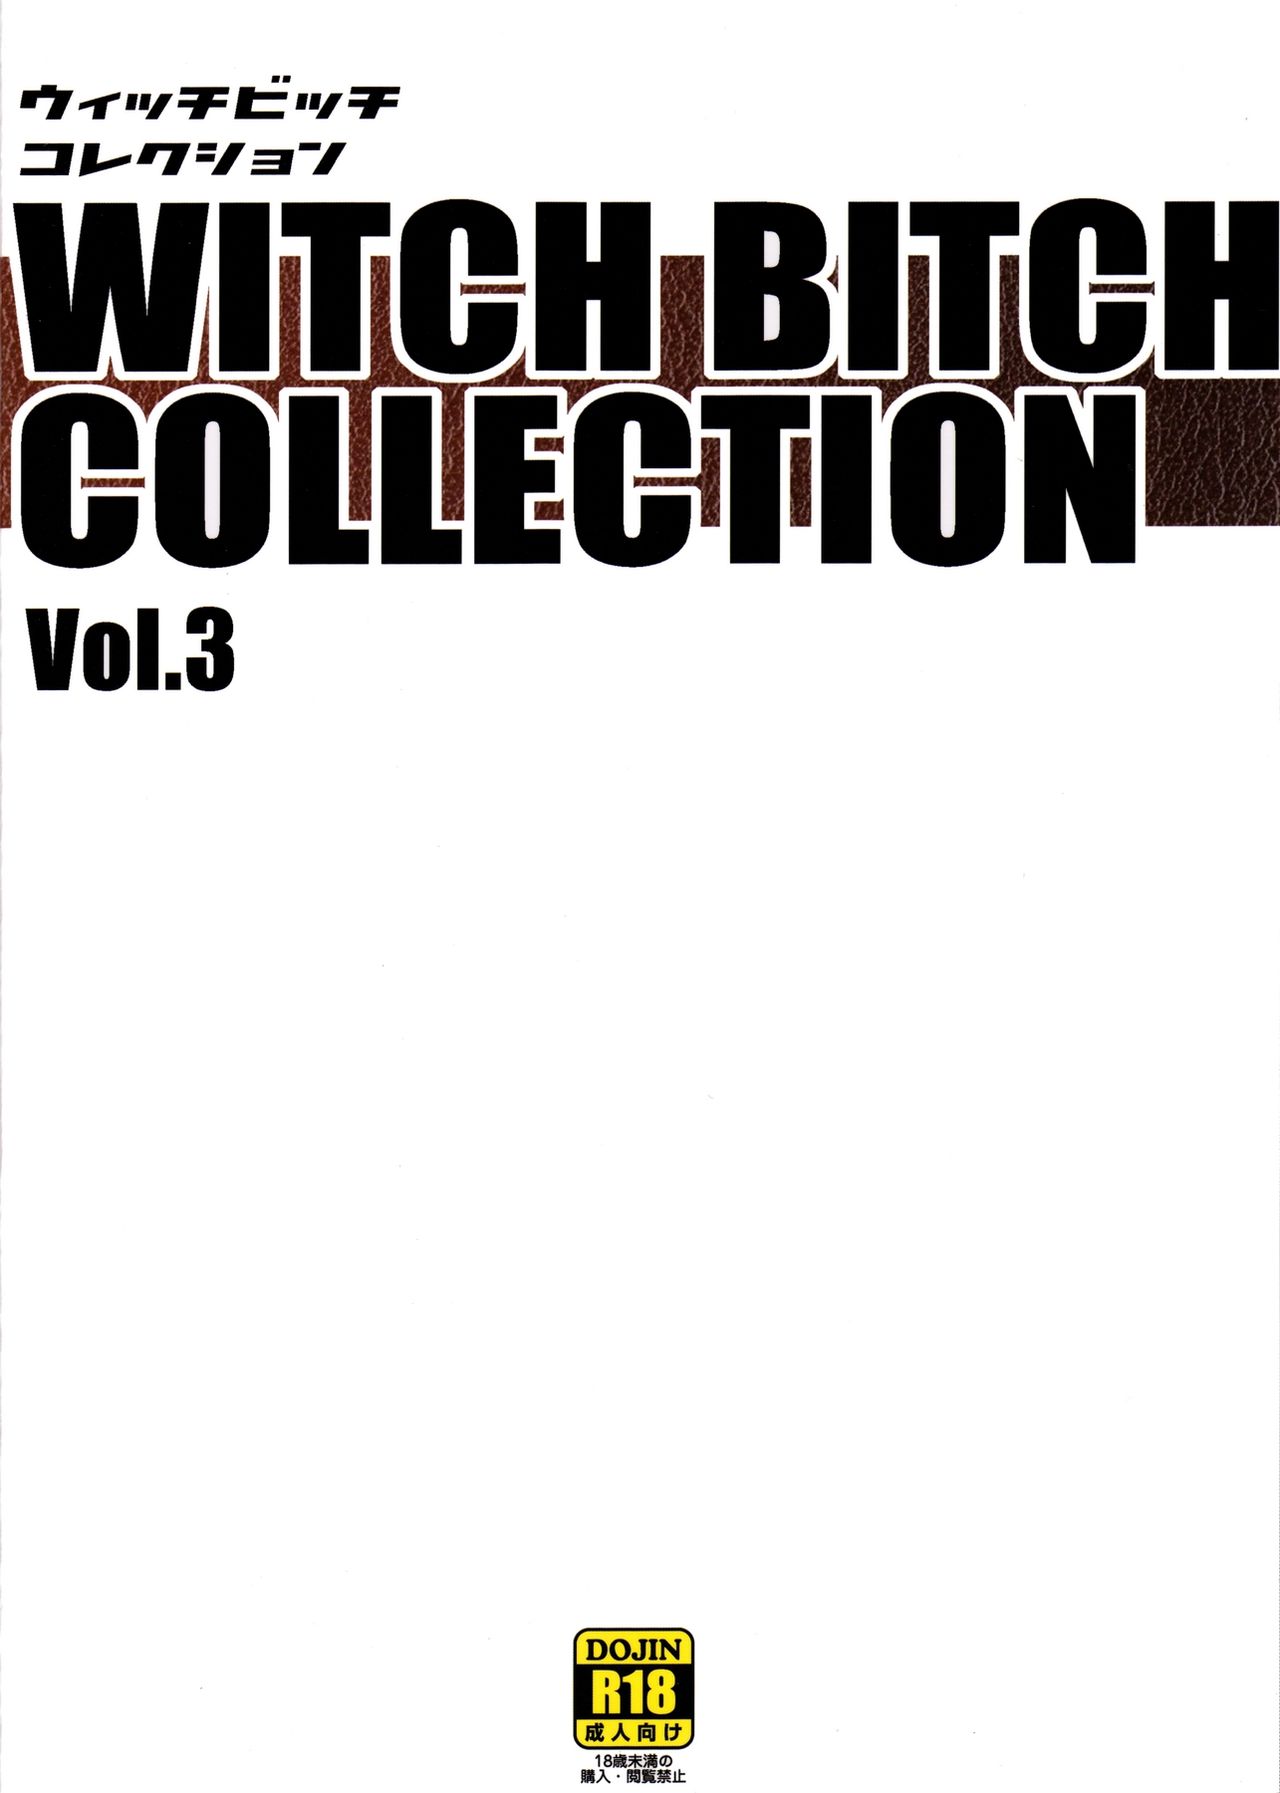 Witch Bitch Collection Vol. 3 numero d'image 49